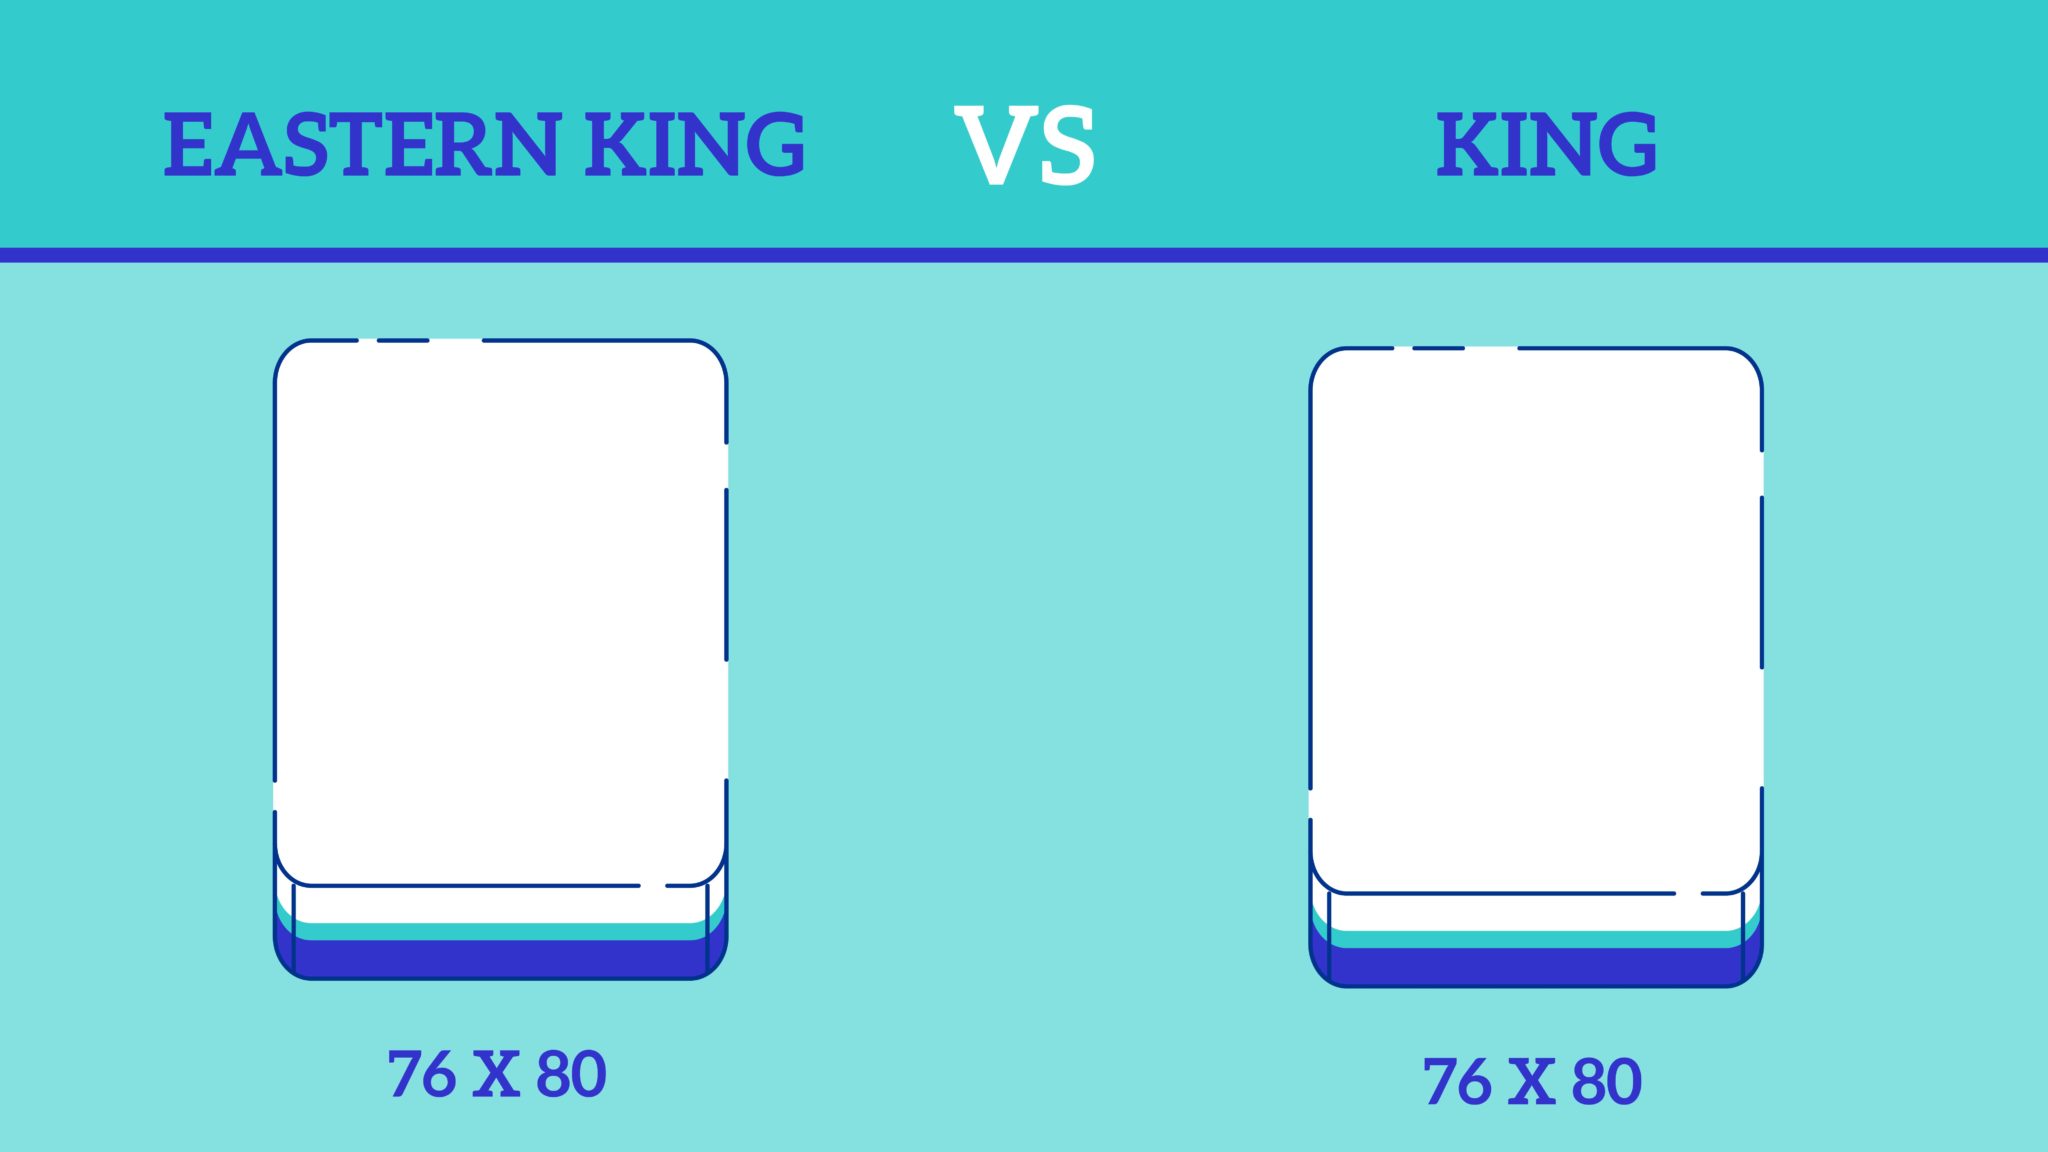 eastern king mattress sizes in inches